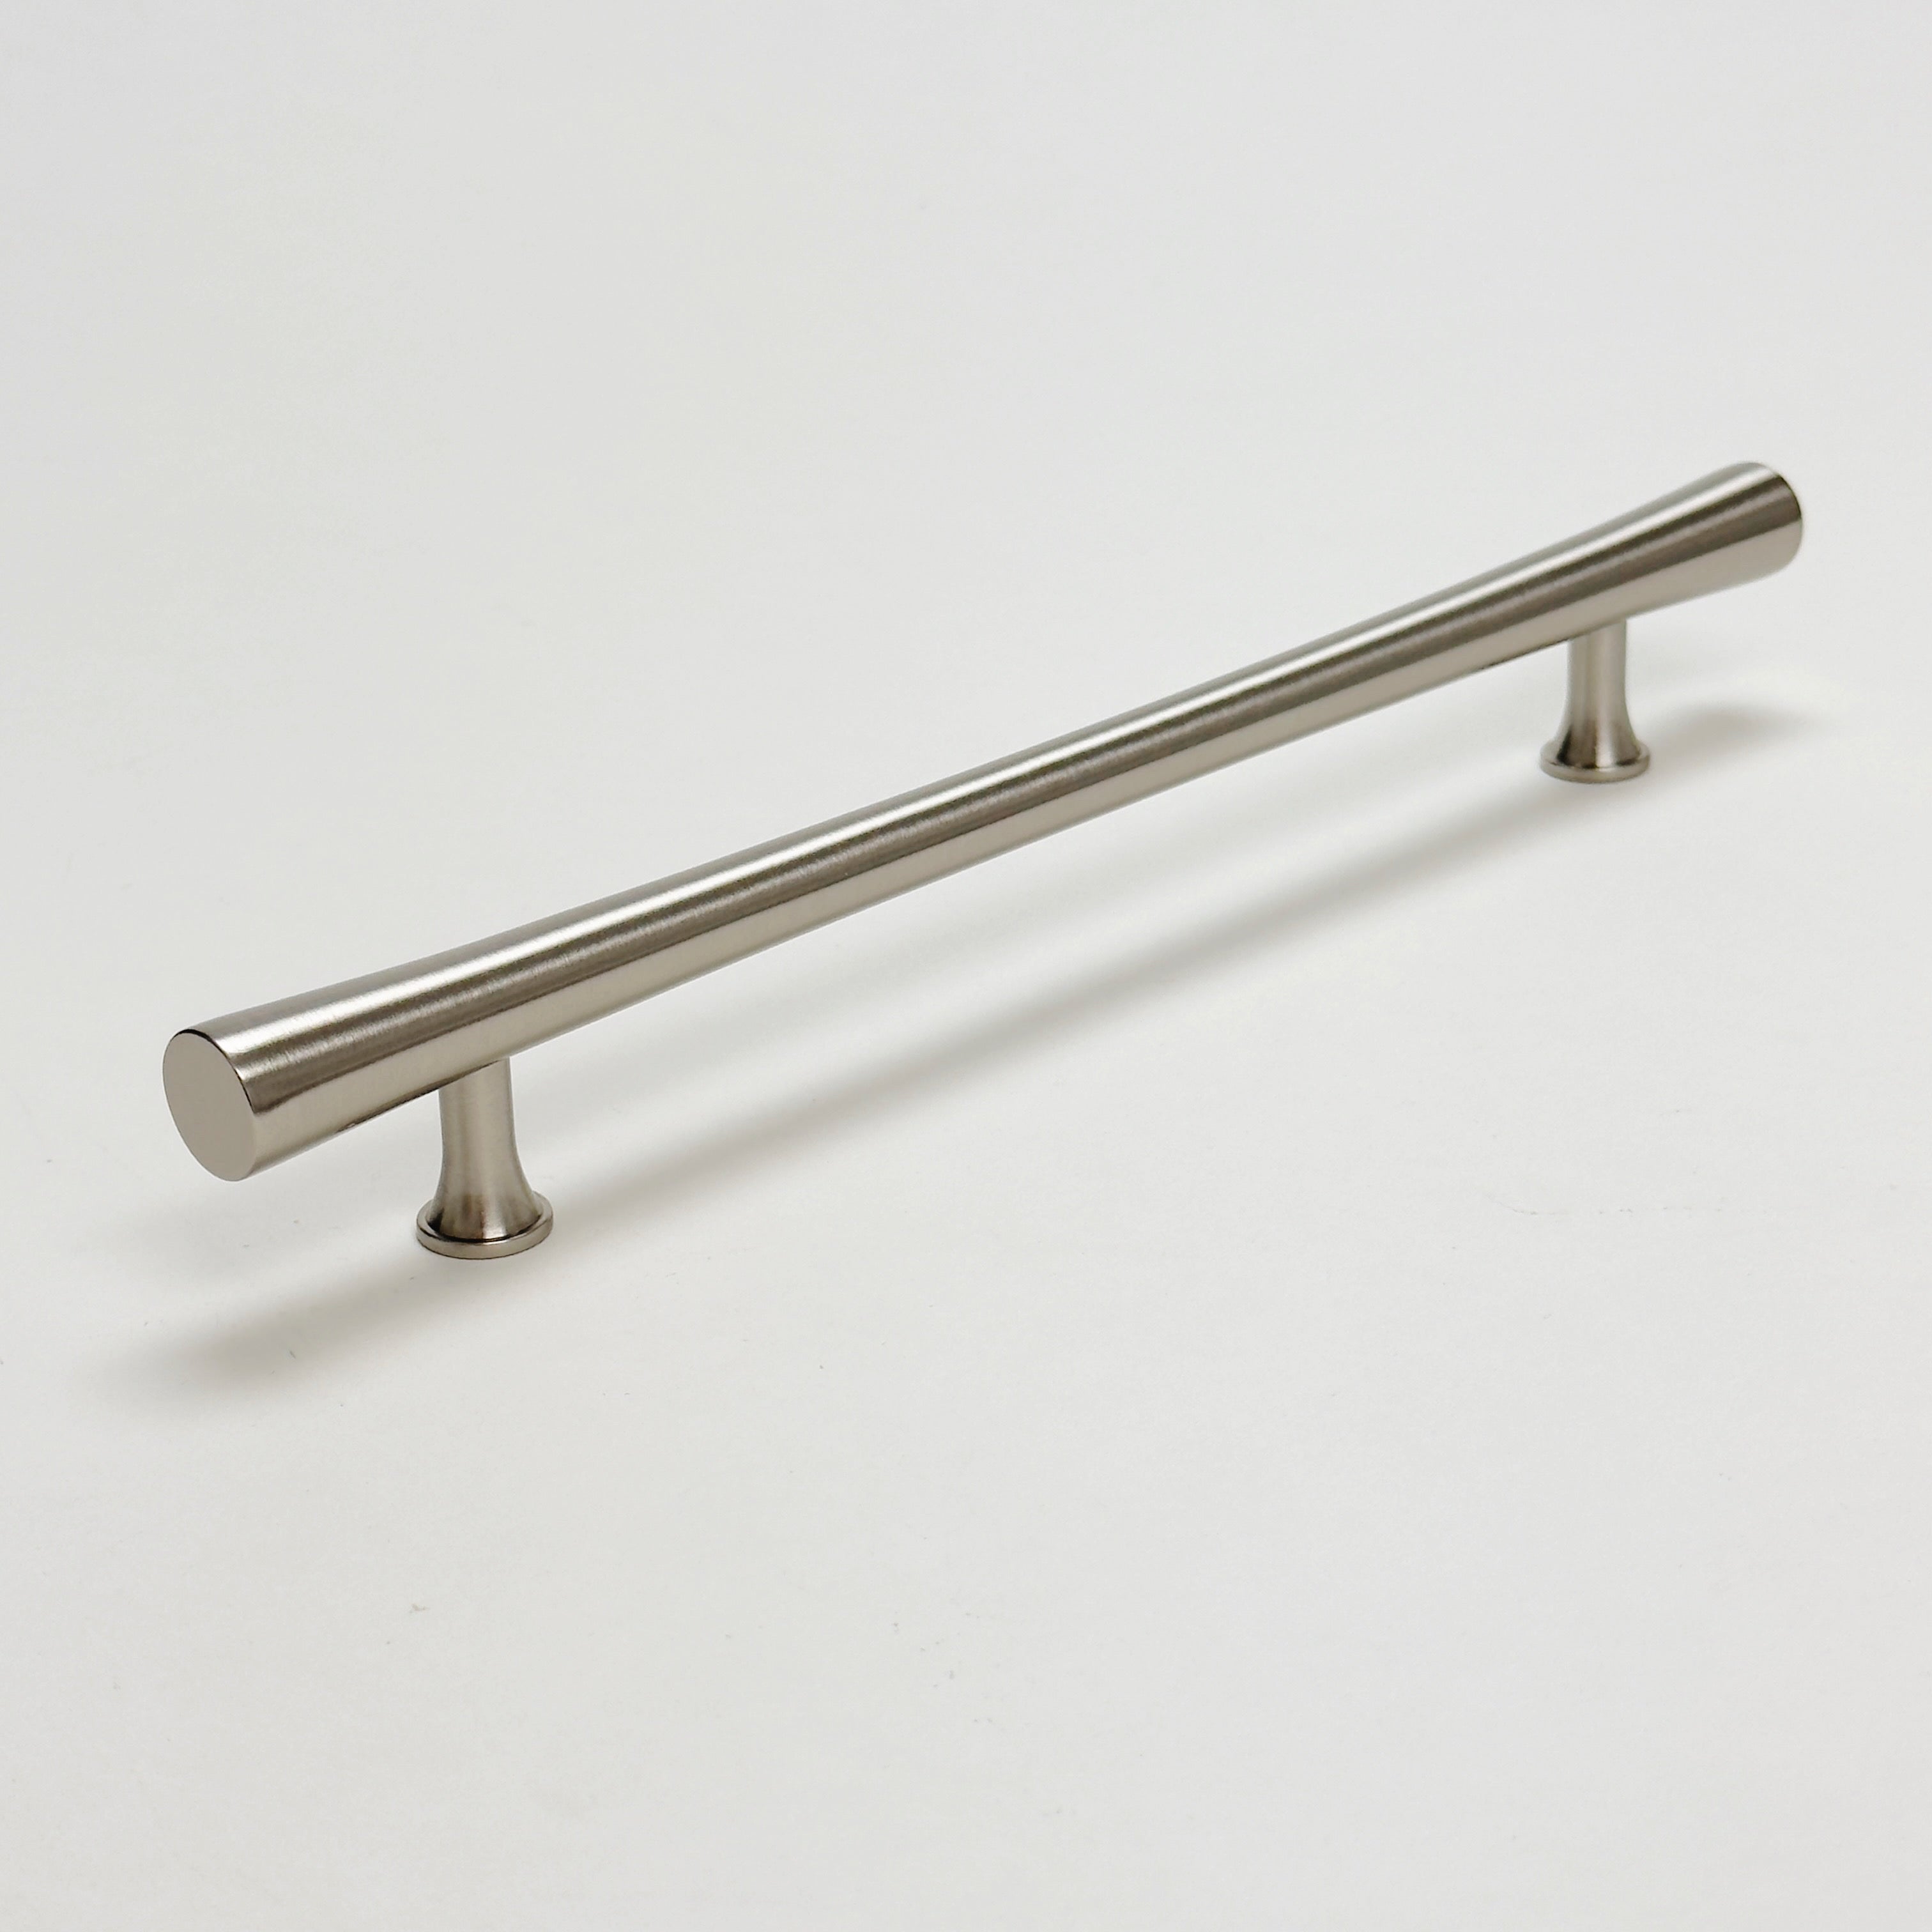 Brushed Nickel Cabinet Hardware "Collin" Drawer Pulls and Cabinet Knobs - Forge Hardware Studio